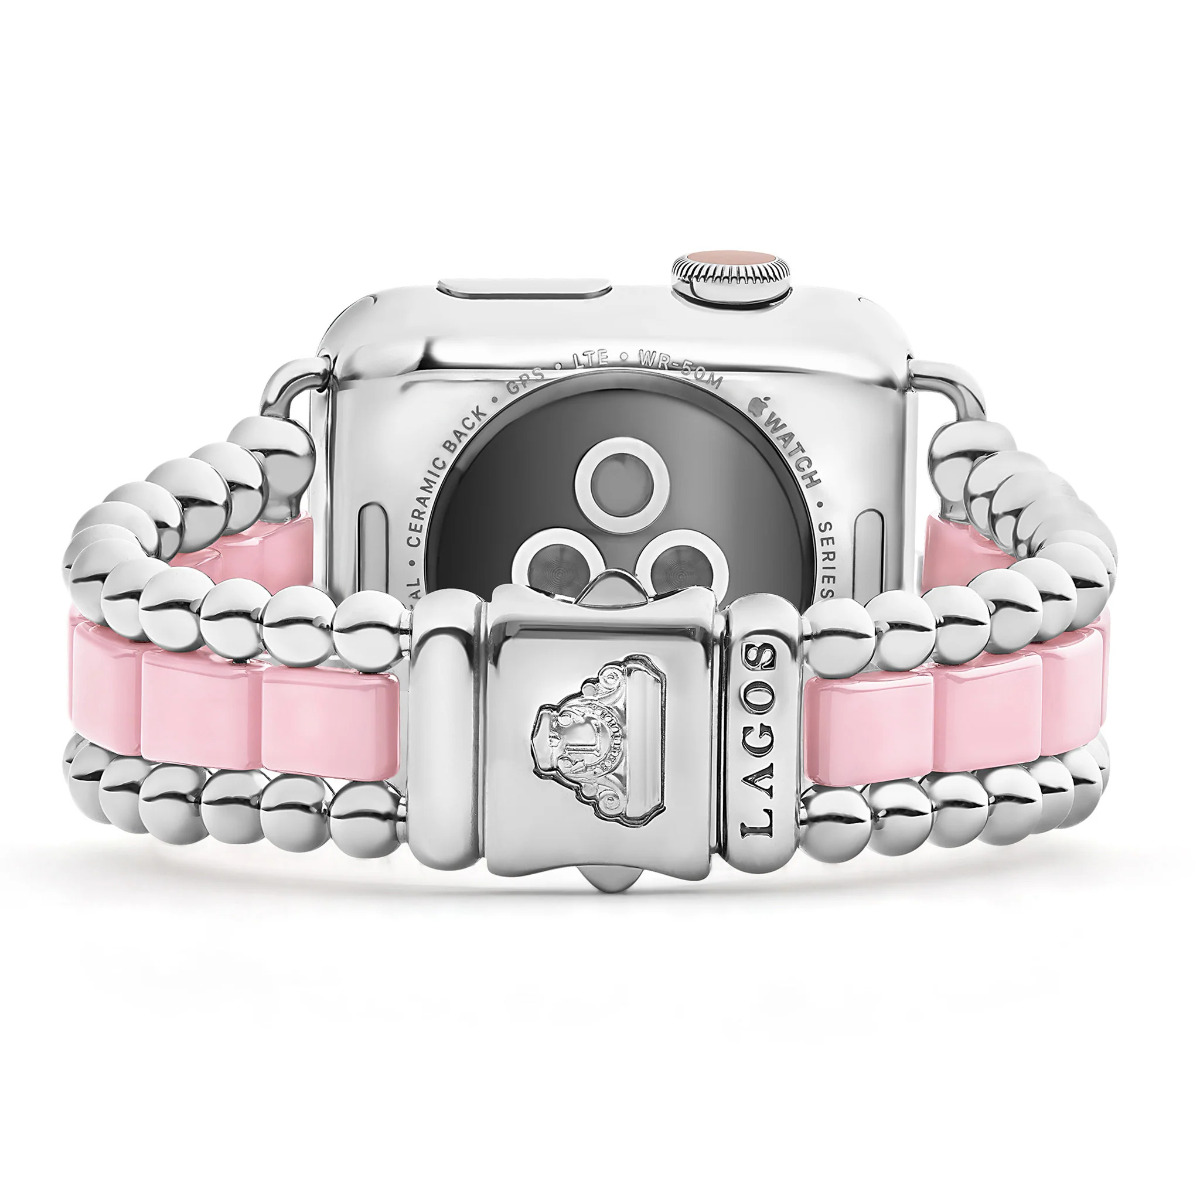 LAGOS "Smart Caviar" Pink Ceramic and Stainless Steel Watch Bracelet-38-45mm